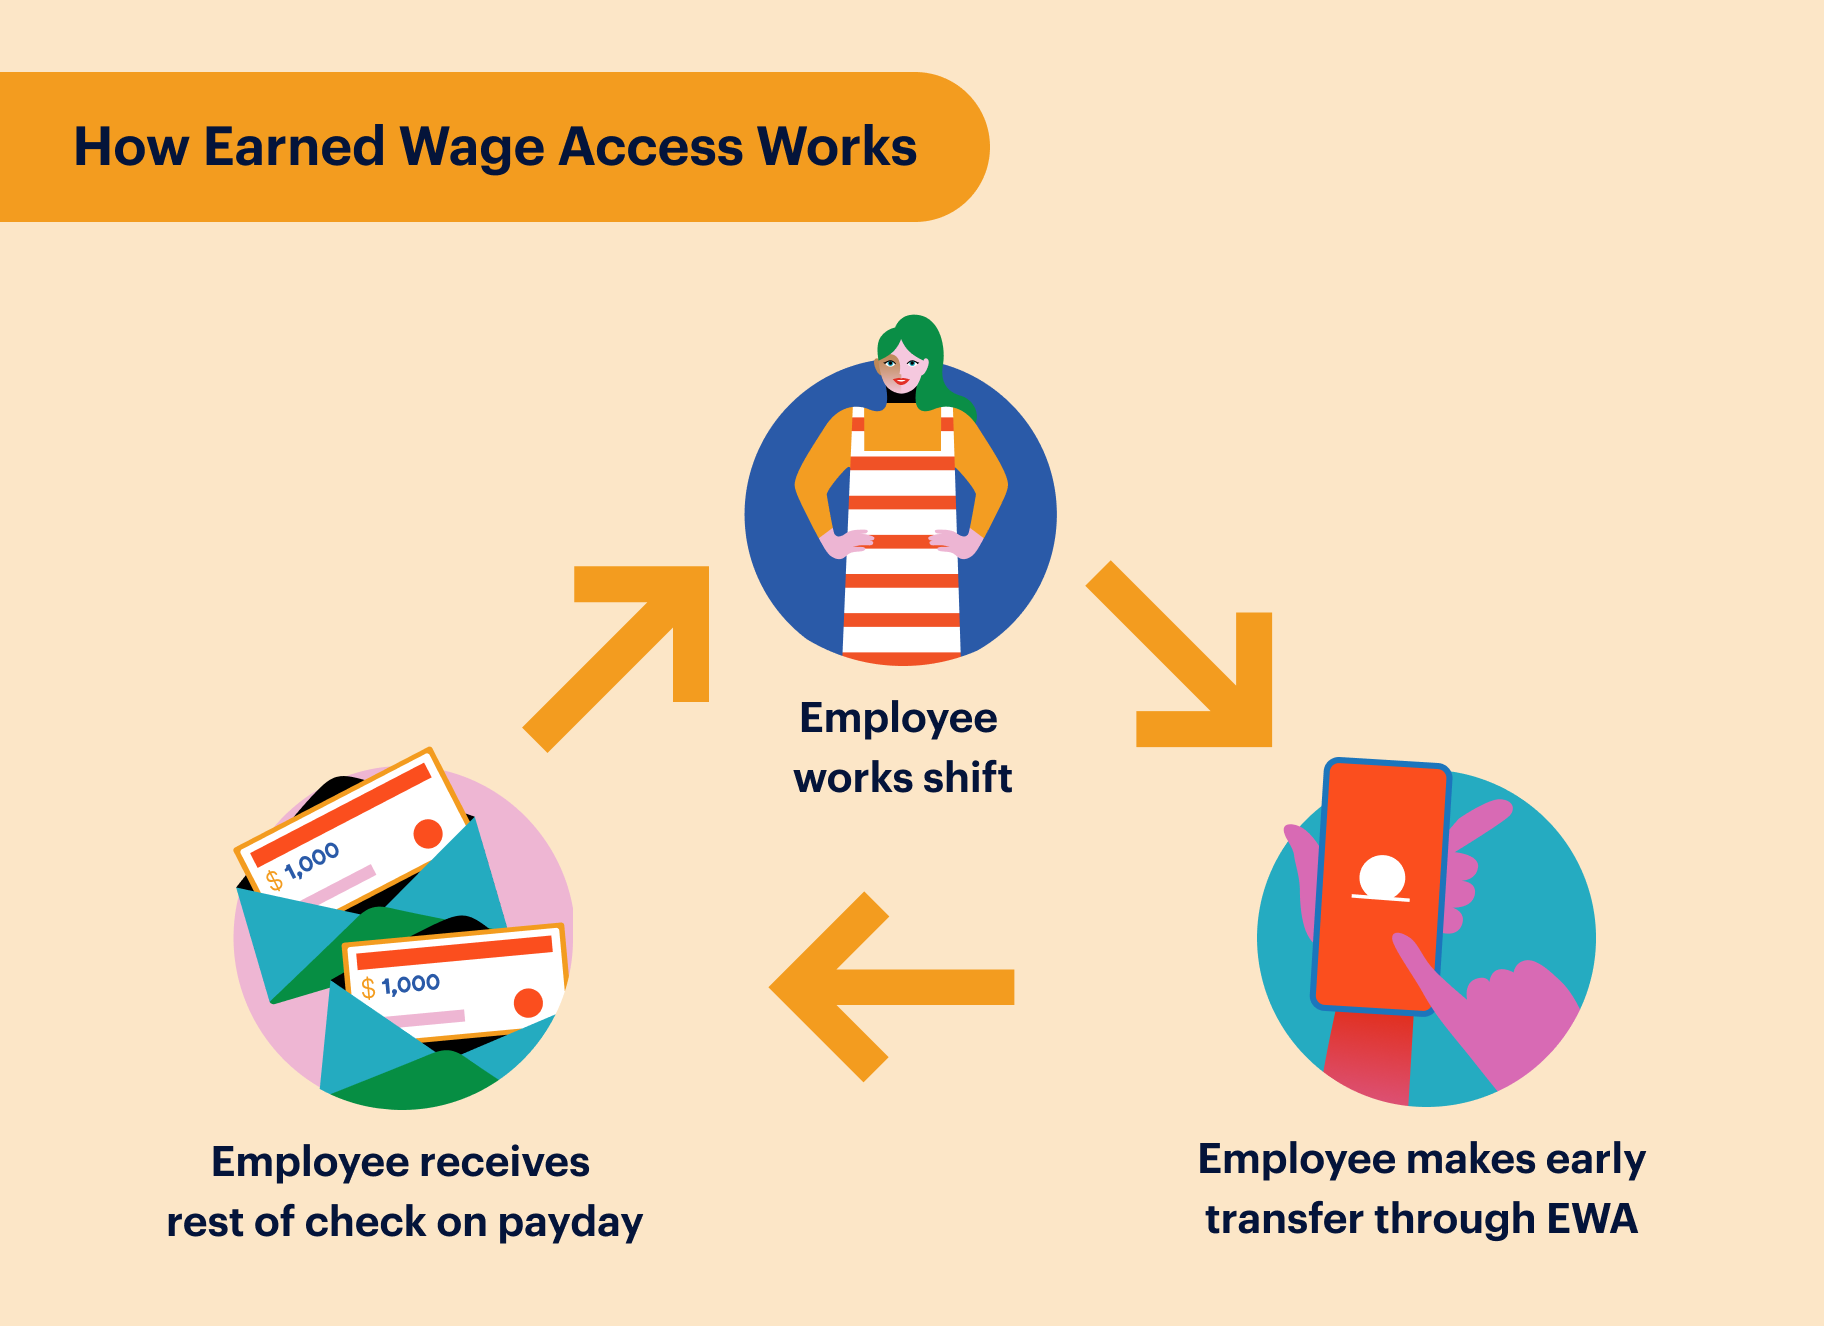 Diagram titled "How Earned Wage Access Works" depicting a cycle. At the top, an employee is shown working a shift. Arrows point to the next step where the employee makes an early transfer through EWA via a smartphone app. Finally, the employee receives the remaining paycheck on payday.